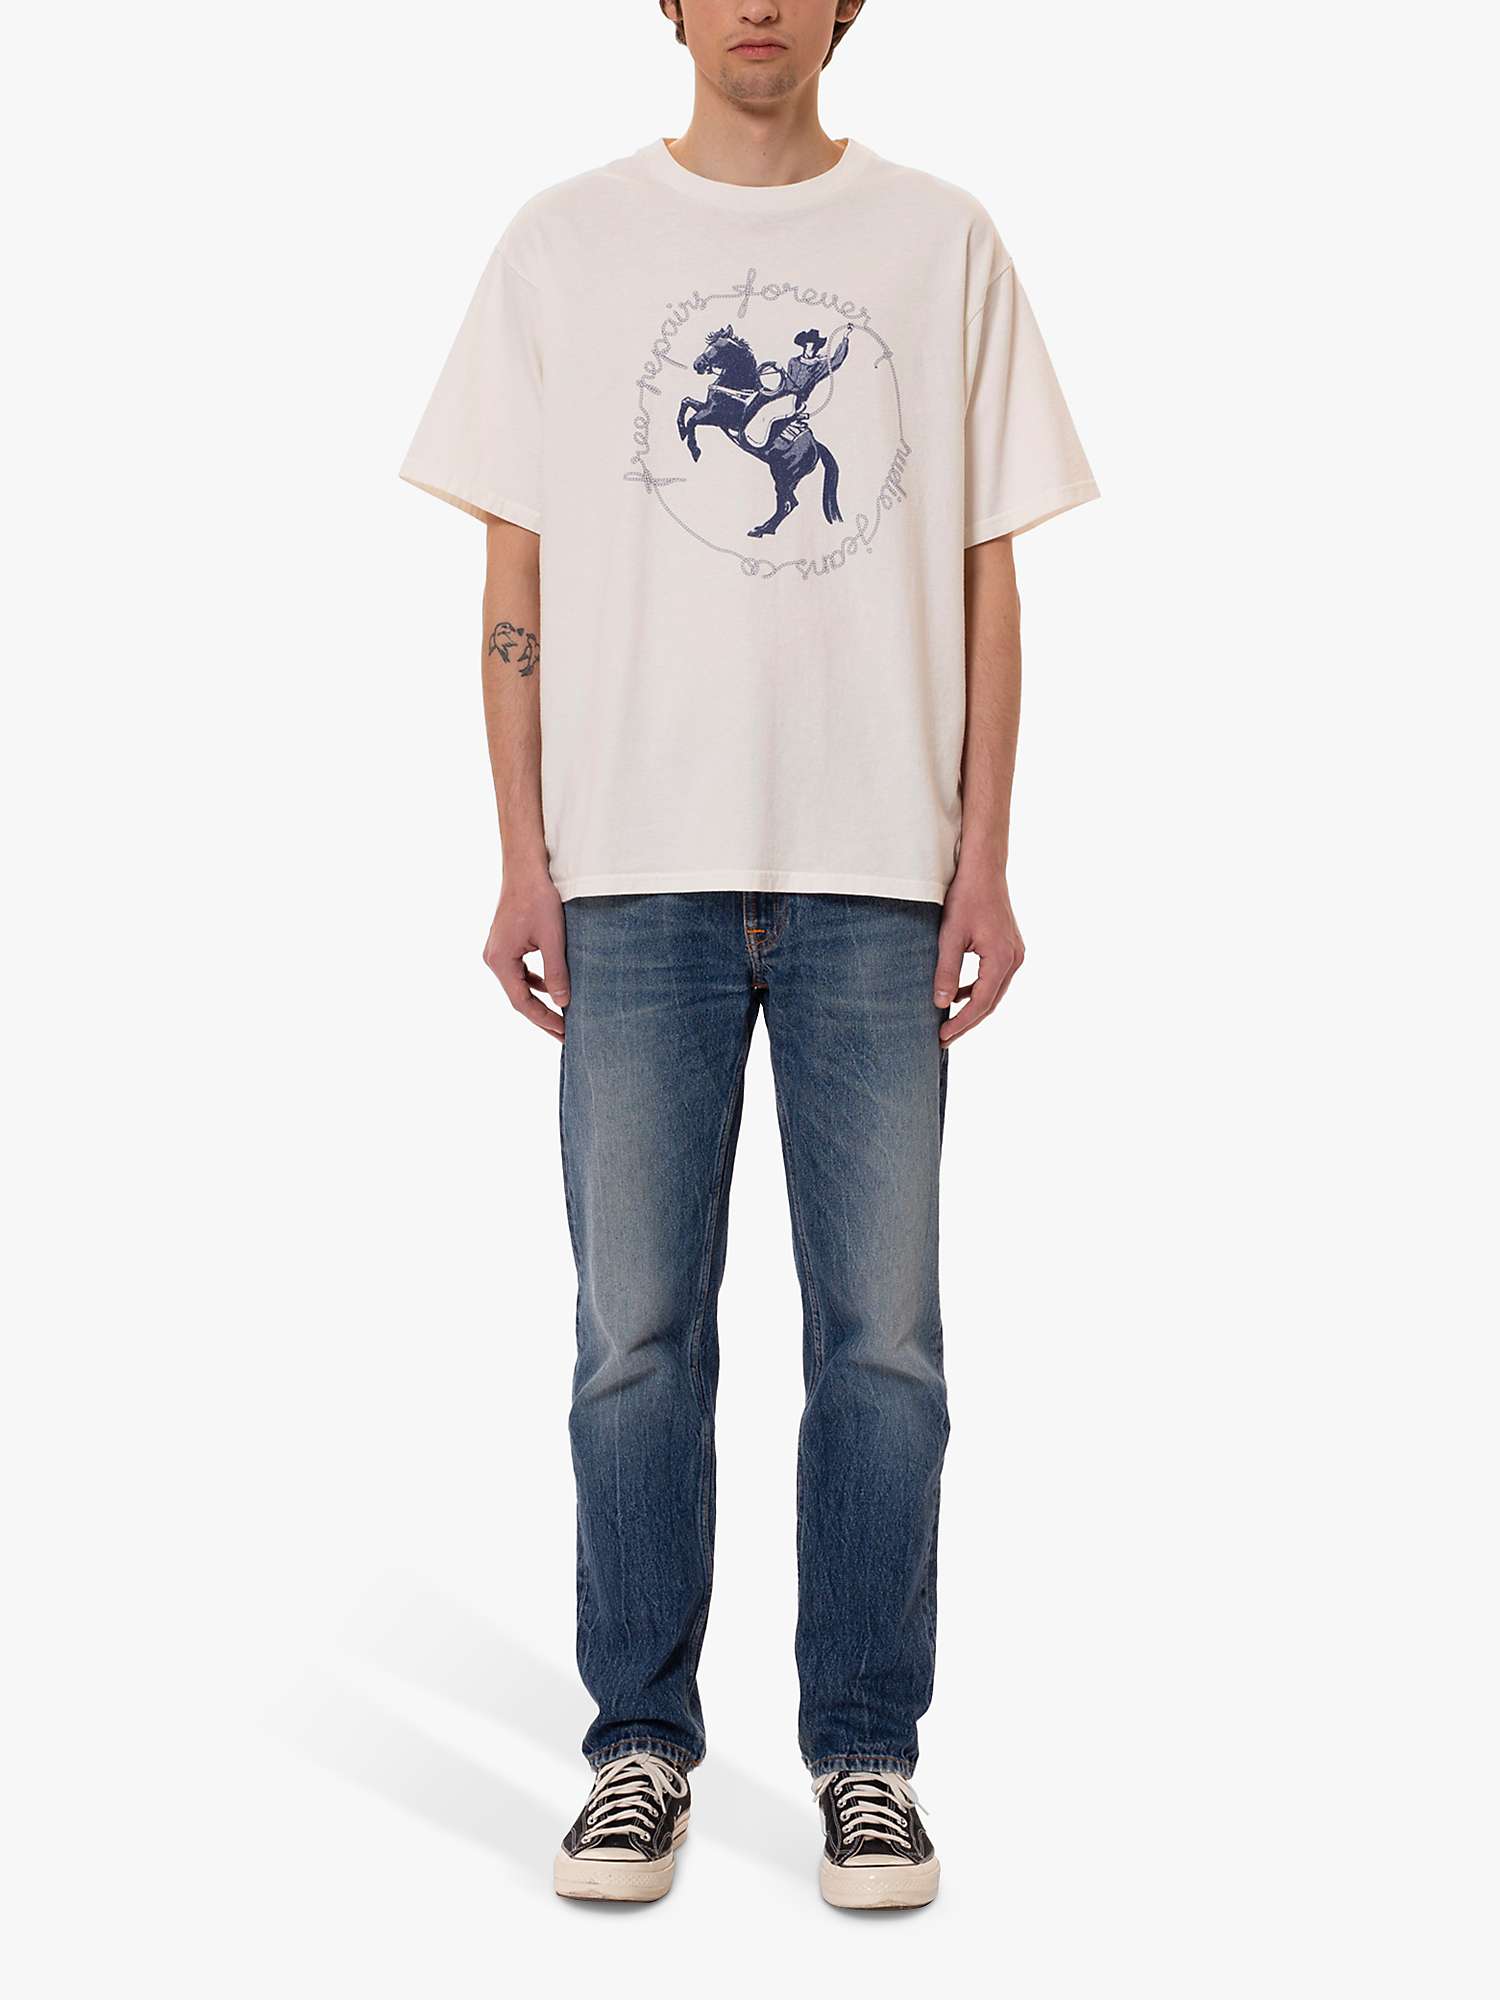 Buy Nudie Jeans Koffe Organic Cotton T-Shirt, White/Blue Online at johnlewis.com